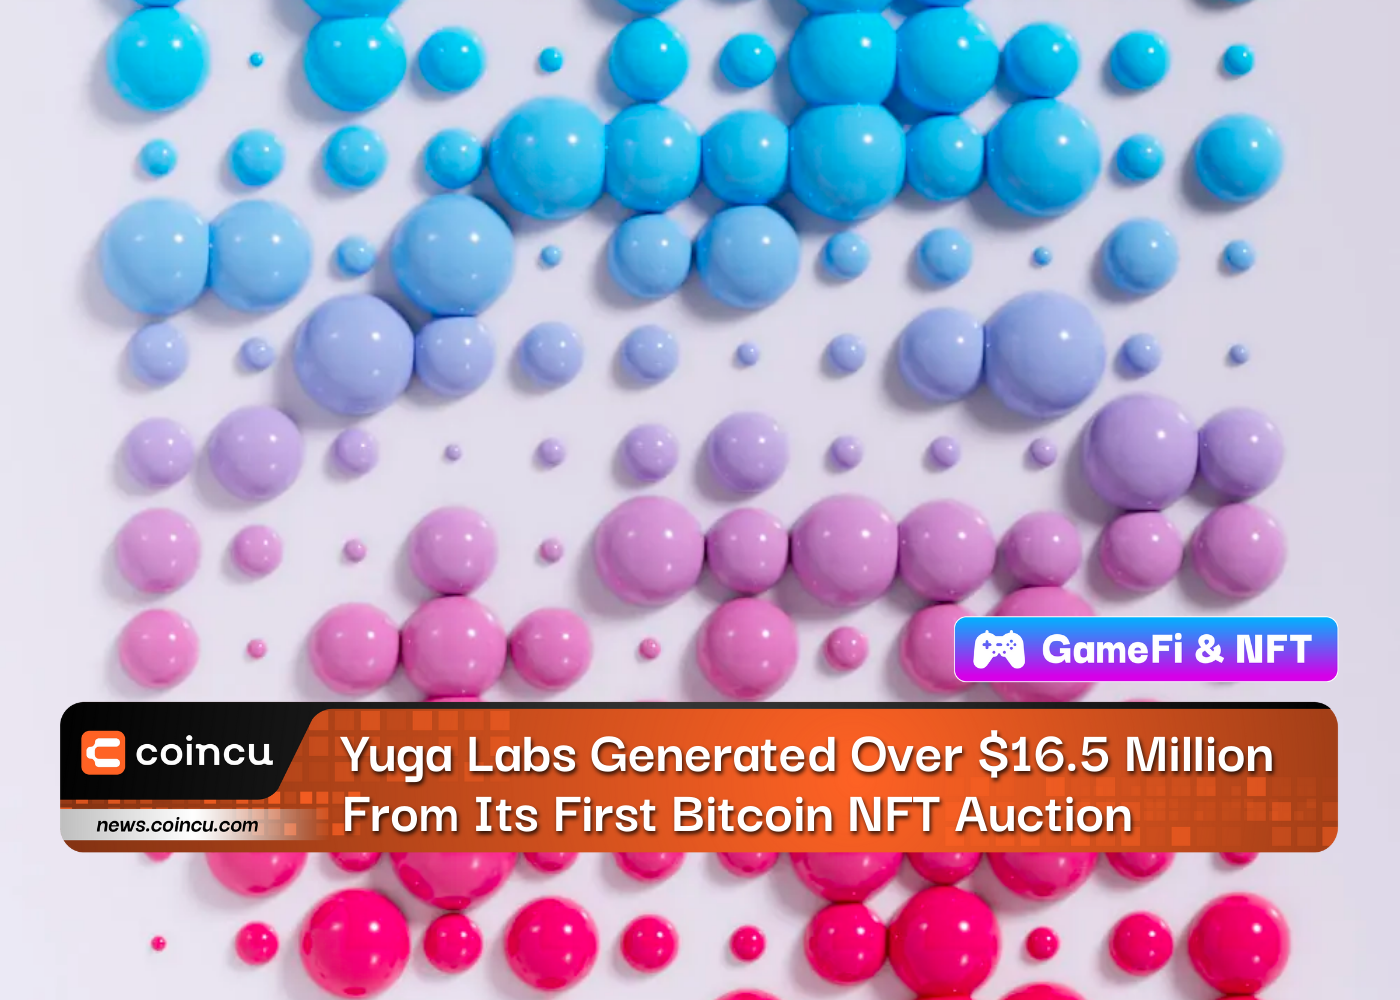 Yuga Labs Generated Over $16.5 Million From Its First Bitcoin NFT Auction